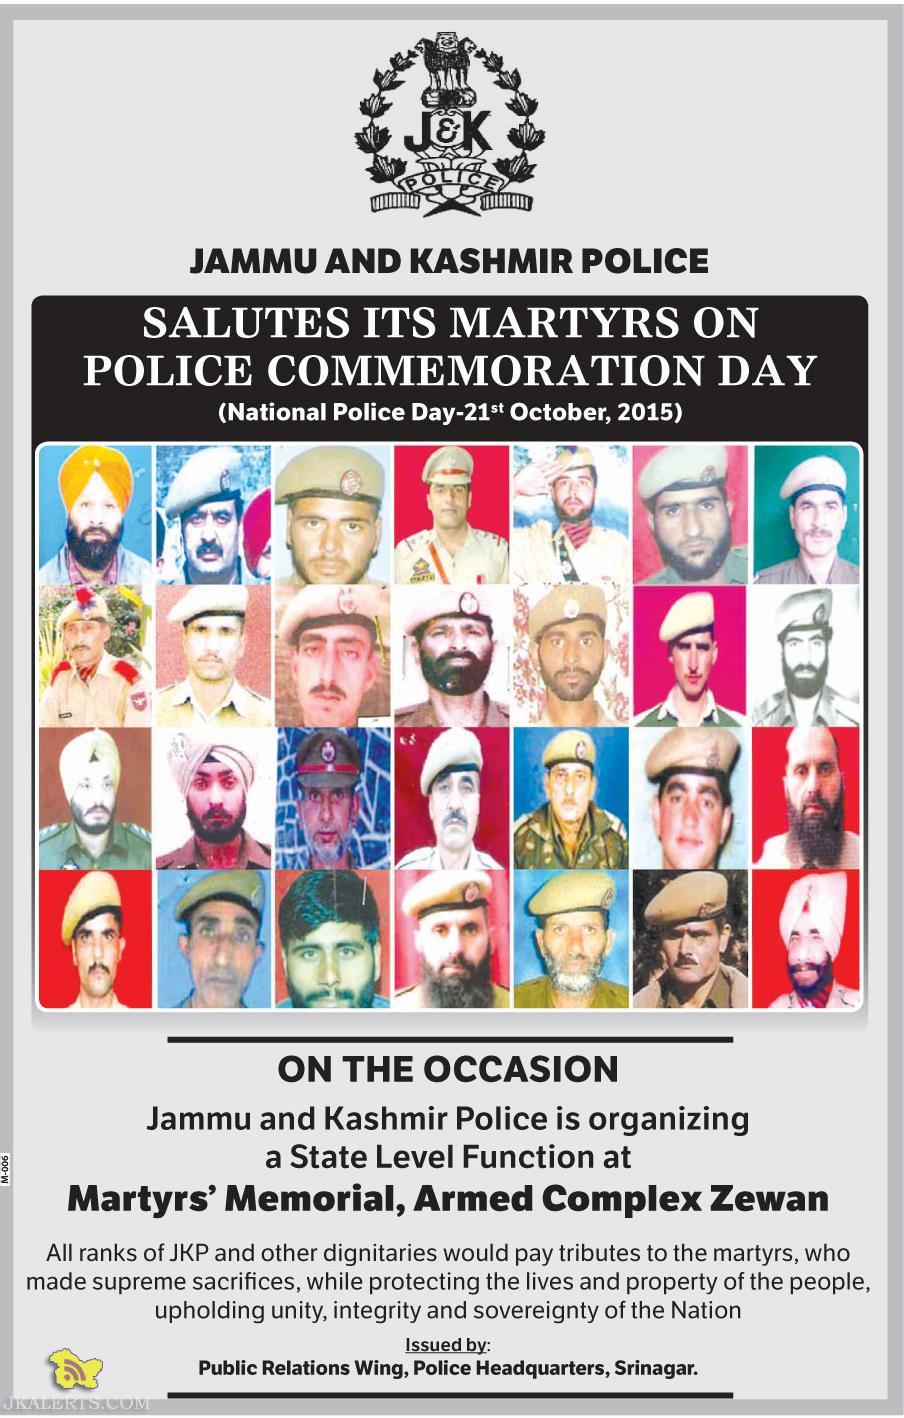 J&K Police SALUTES ITS MARTYRS by organizing a State Level Function